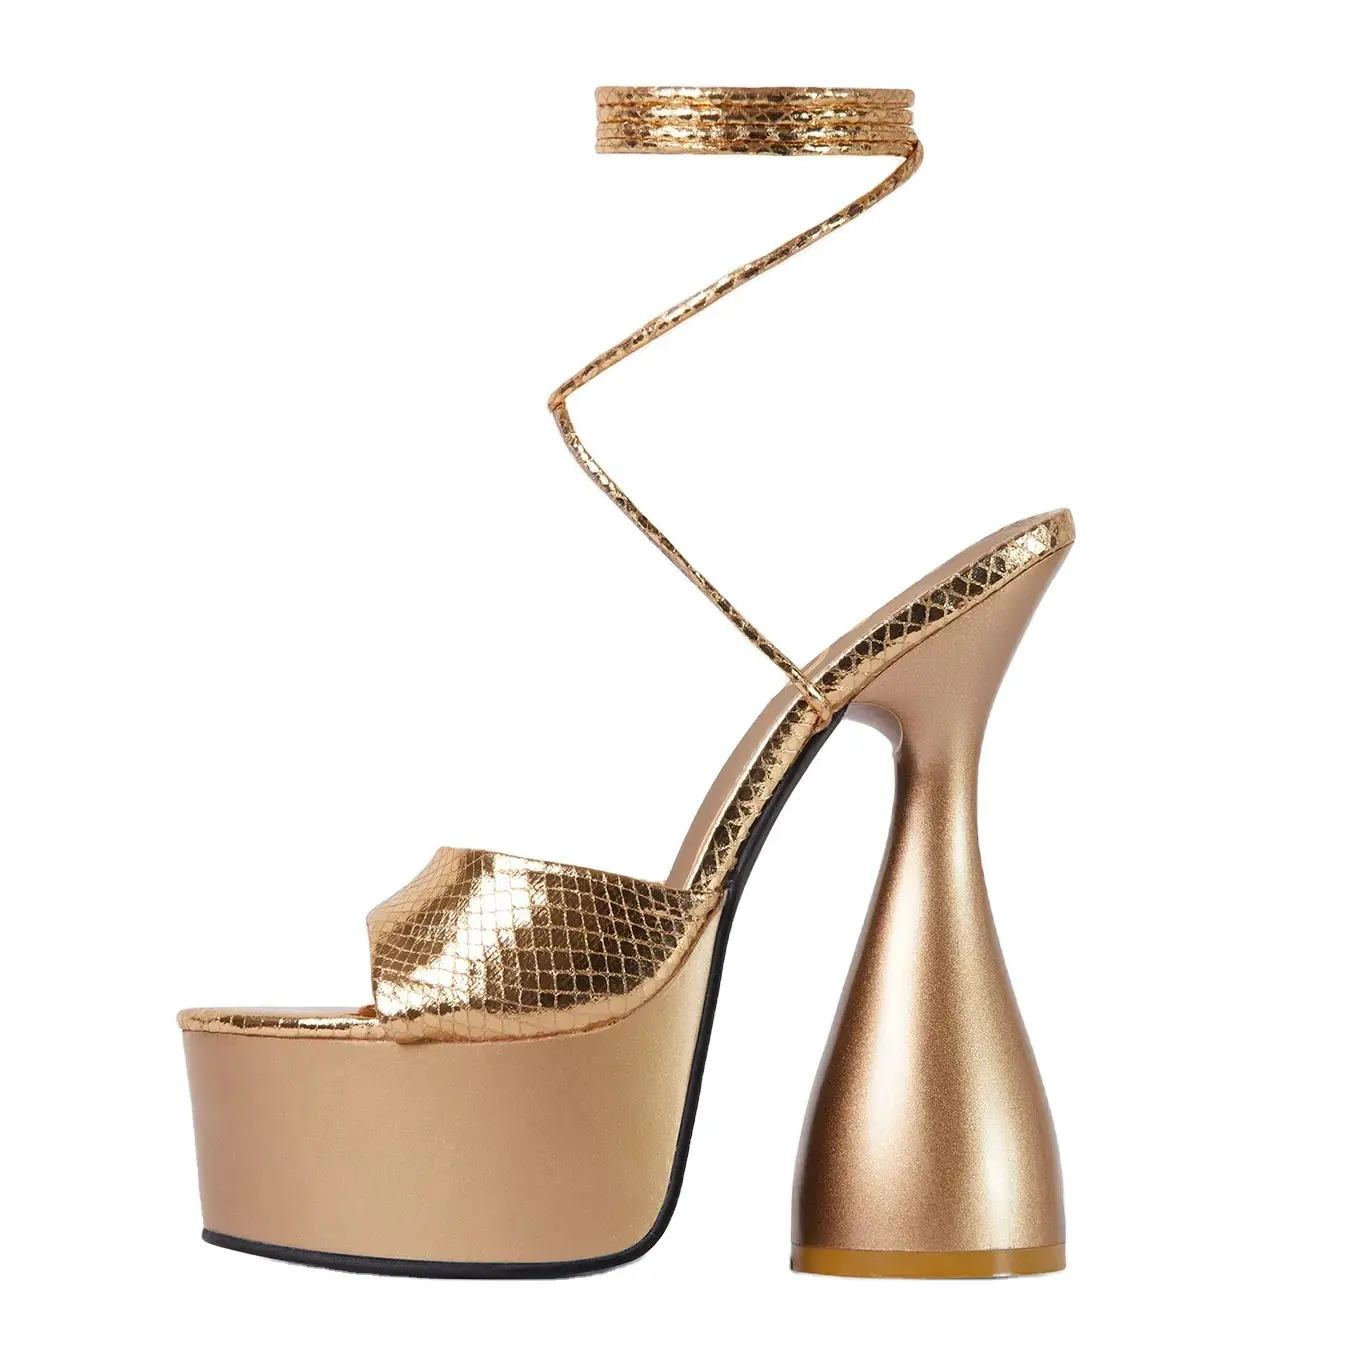 Lace up luxury women shoes sandals with platform gold heels with custom designs